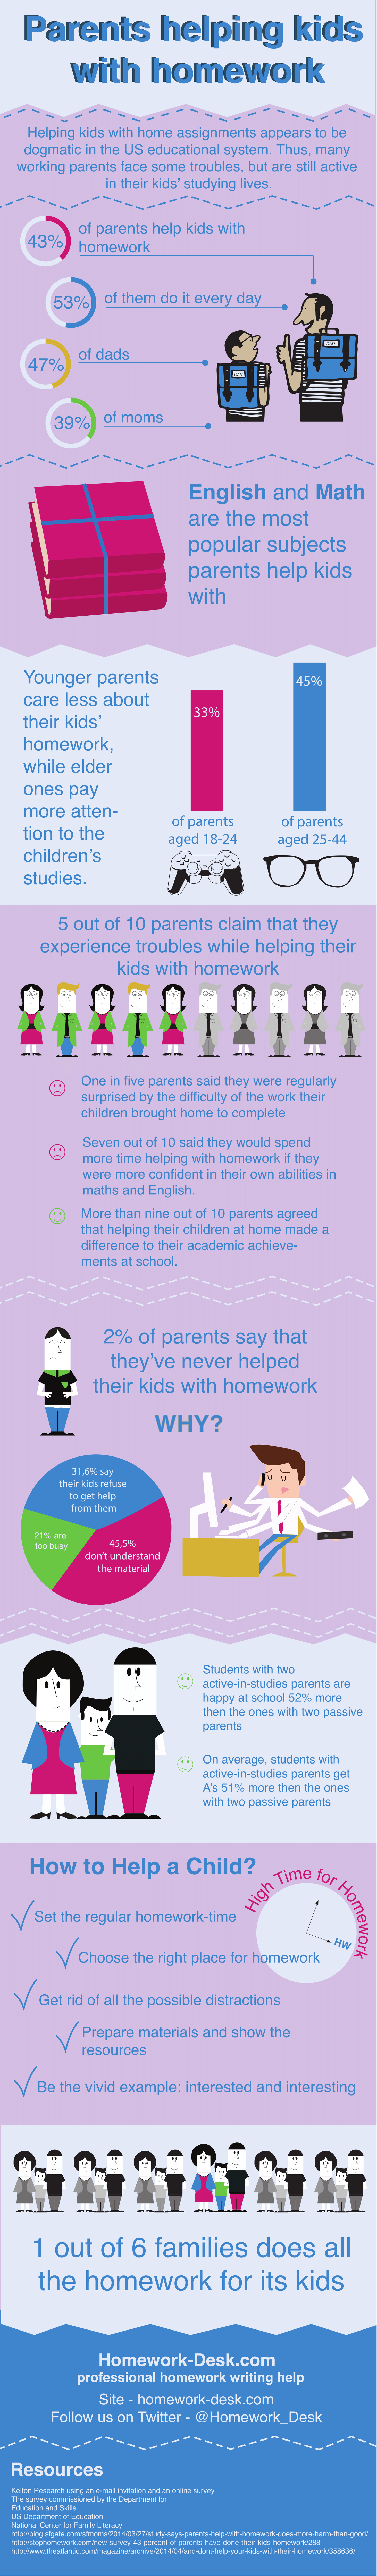 Parents Helping Kids with Homework